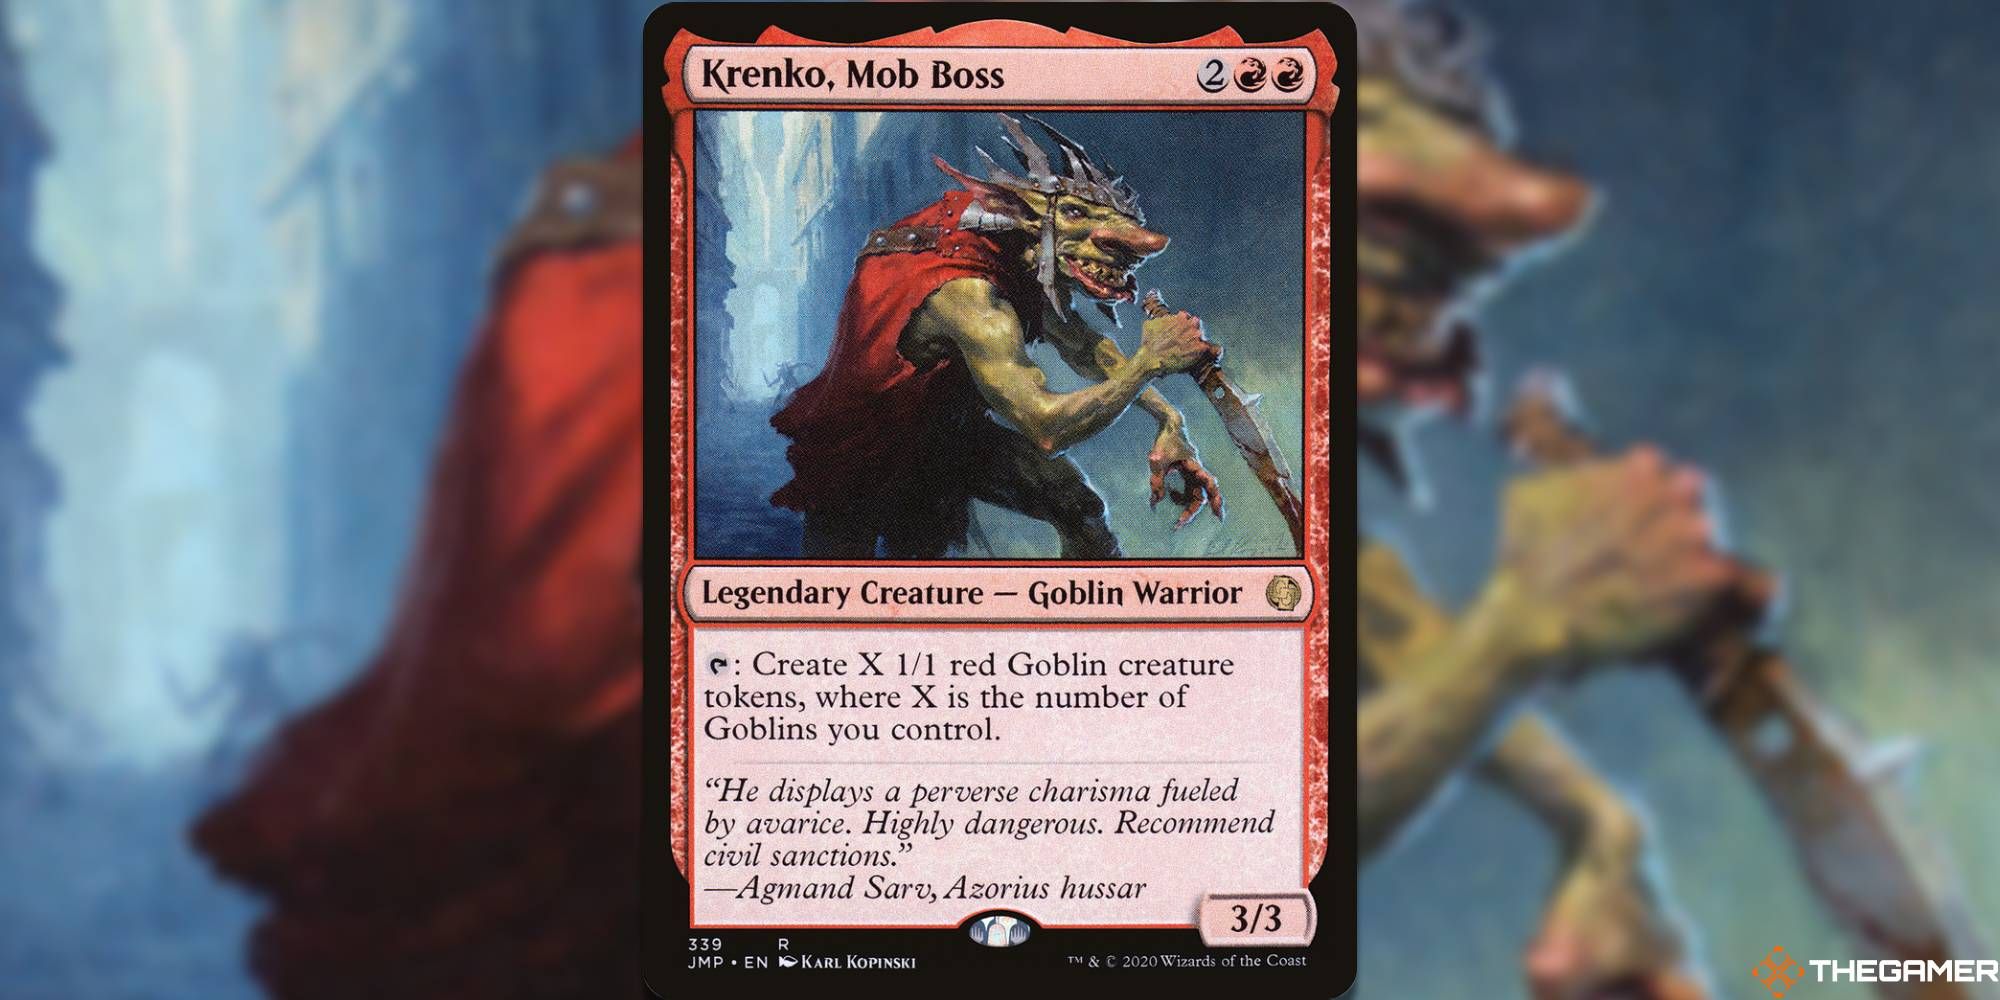 Image of the Krenko Mob Boss card in Magic: The Gathering, with art by Karn Kopinski